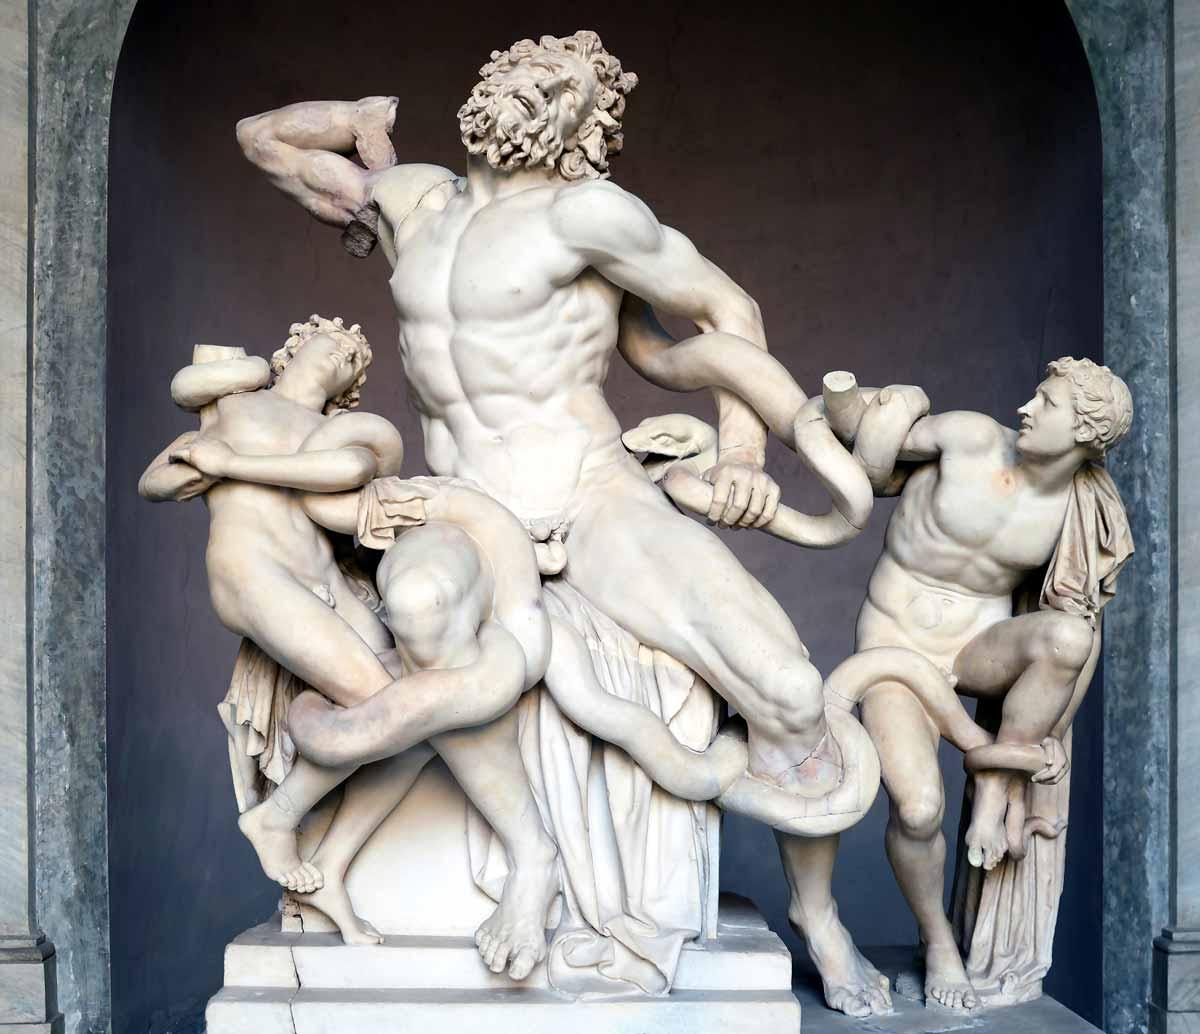 Laocoön and his sons, also known as the Laocoön Group. Marble, copy after an Hellenistic original from c. 200 BC. Found in the Baths of Trajan, 1506.